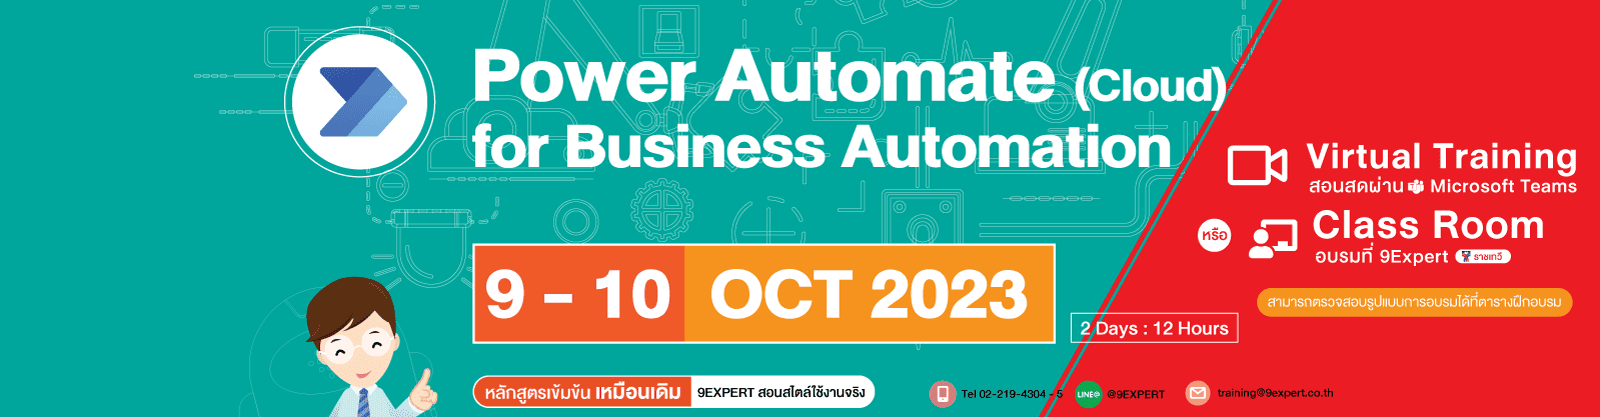 Power Automate (Cloud) for Business Automation (2days) 9 - 10 ตุลาคม 2566